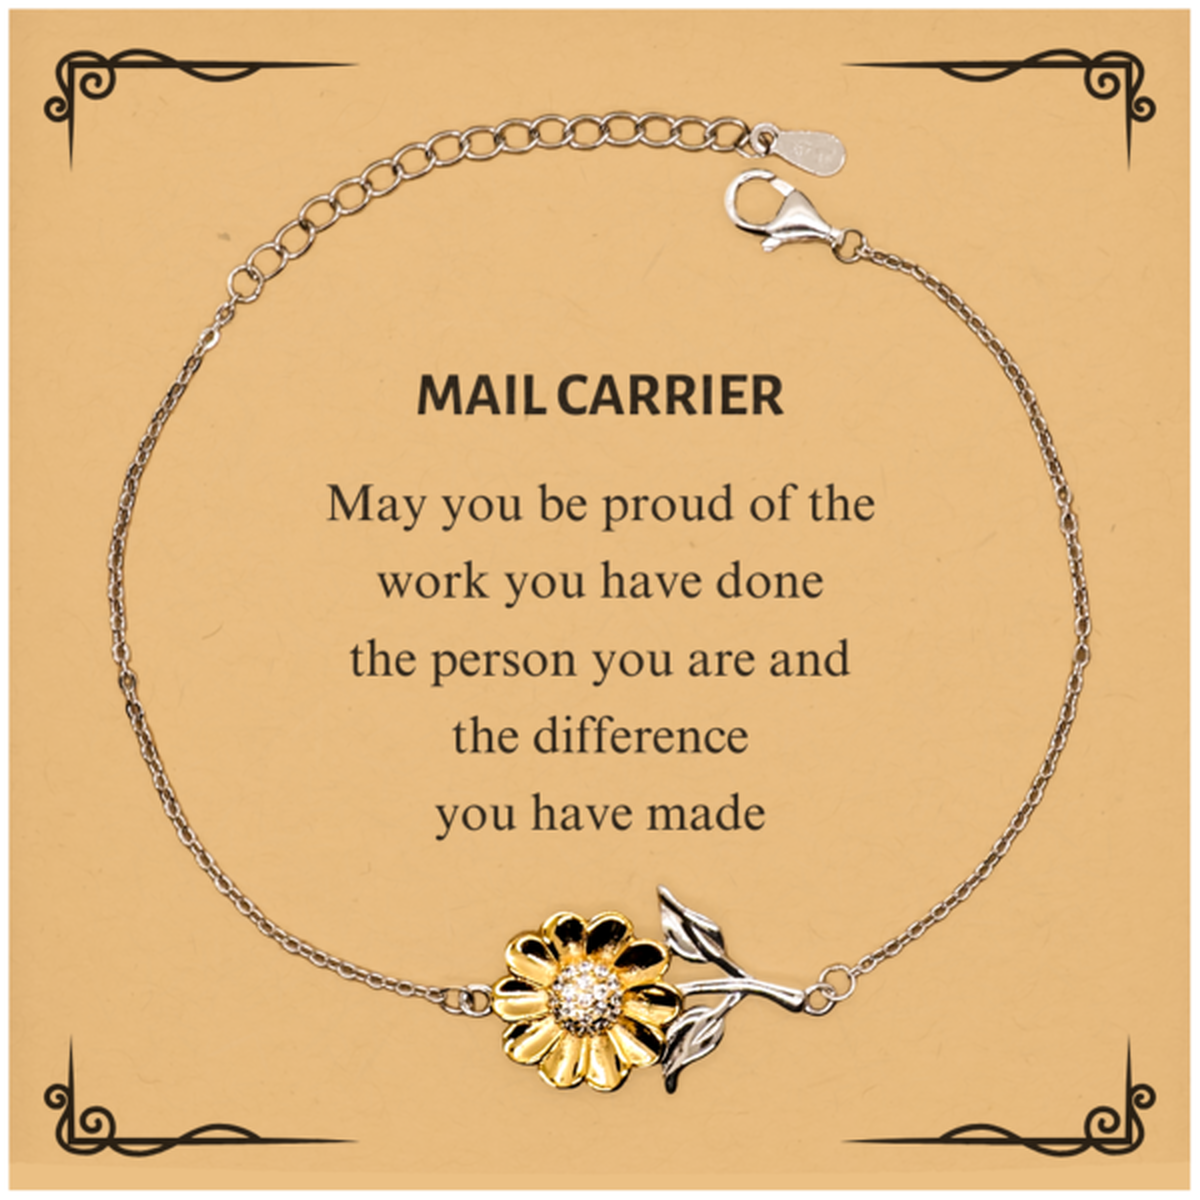 Mail Carrier May you be proud of the work you have done, Retirement Mail Carrier Sunflower Bracelet for Colleague Appreciation Gifts Amazing for Mail Carrier